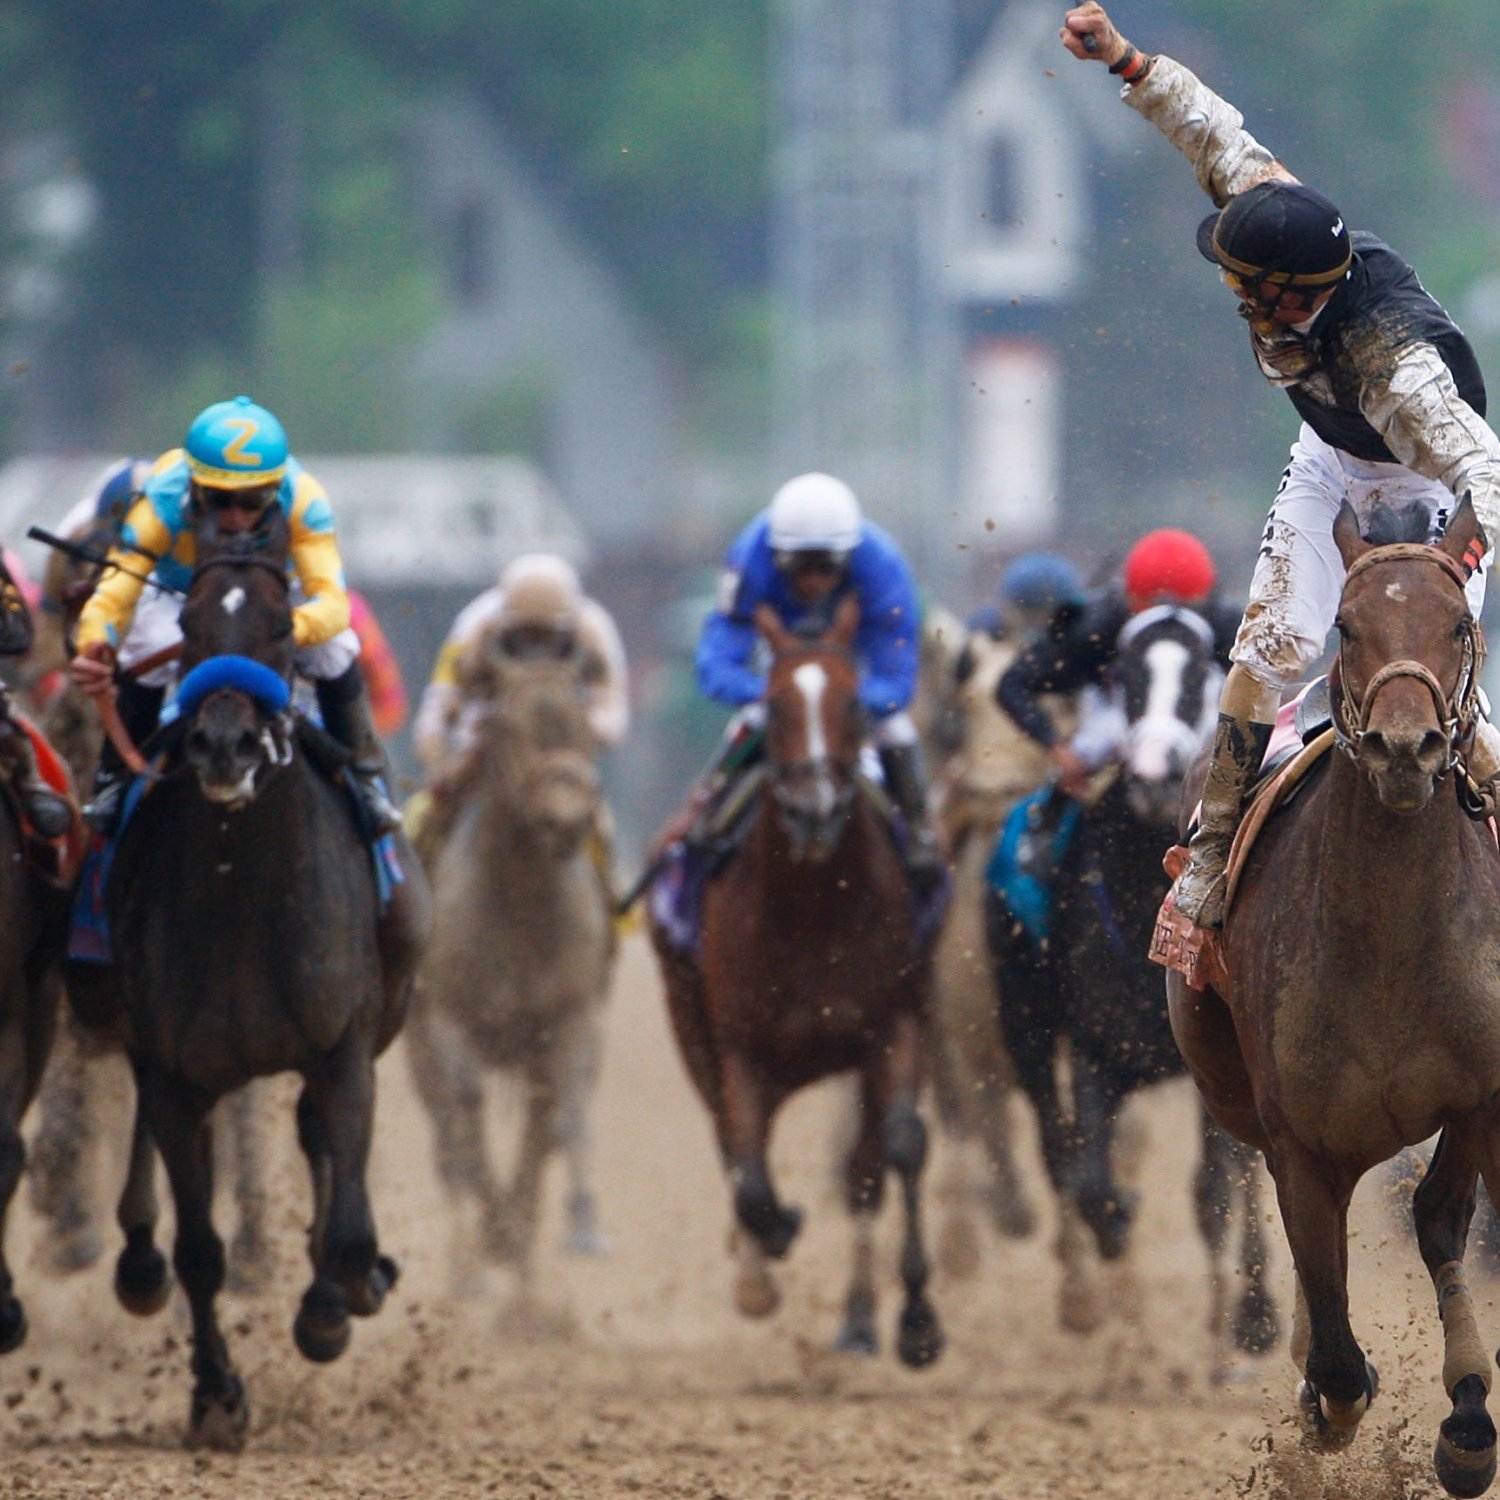 Kentucky Derby 2012 Why This Is the Year for a Longshot Winner